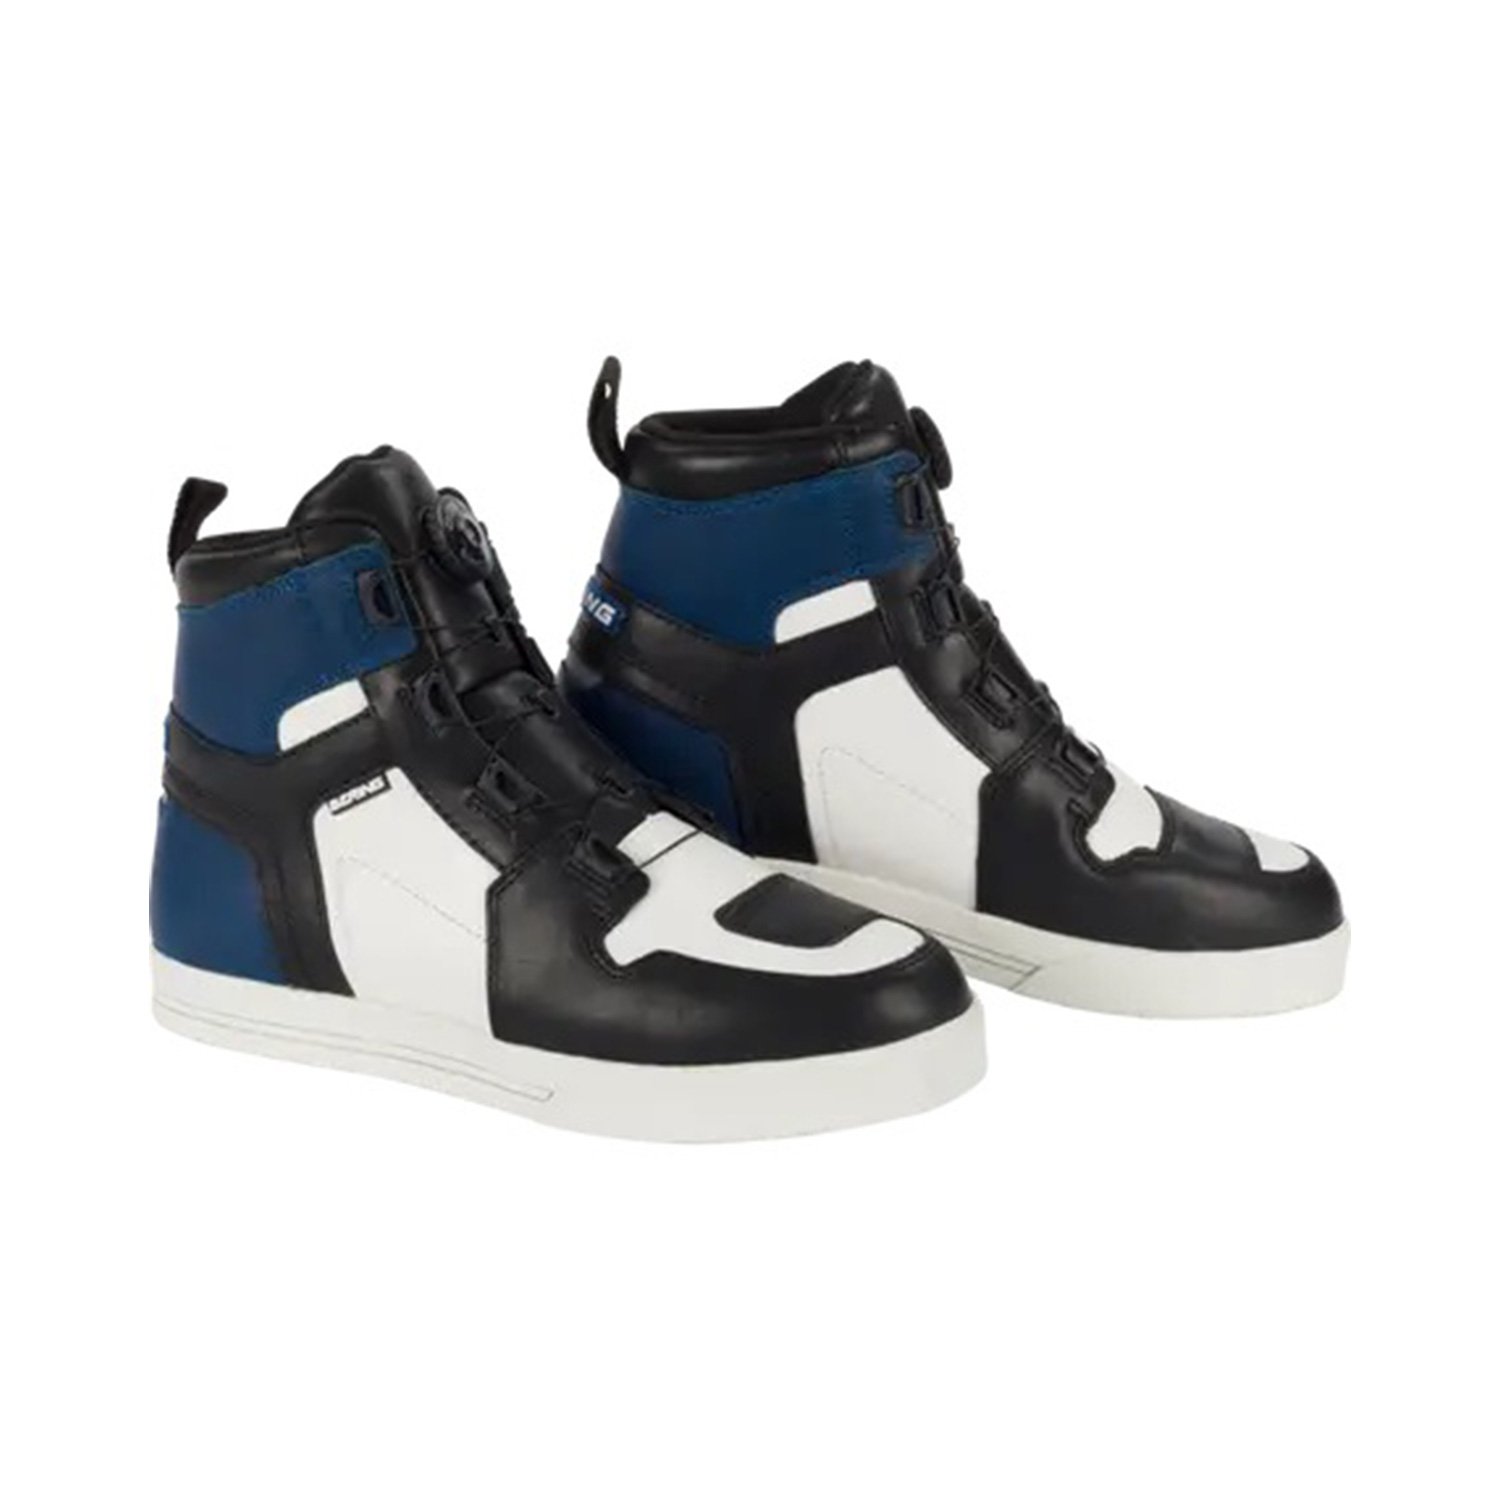 Image of Bering Sneakers Reflex A-Top Black White Blue Size 46 ID 3660815176801